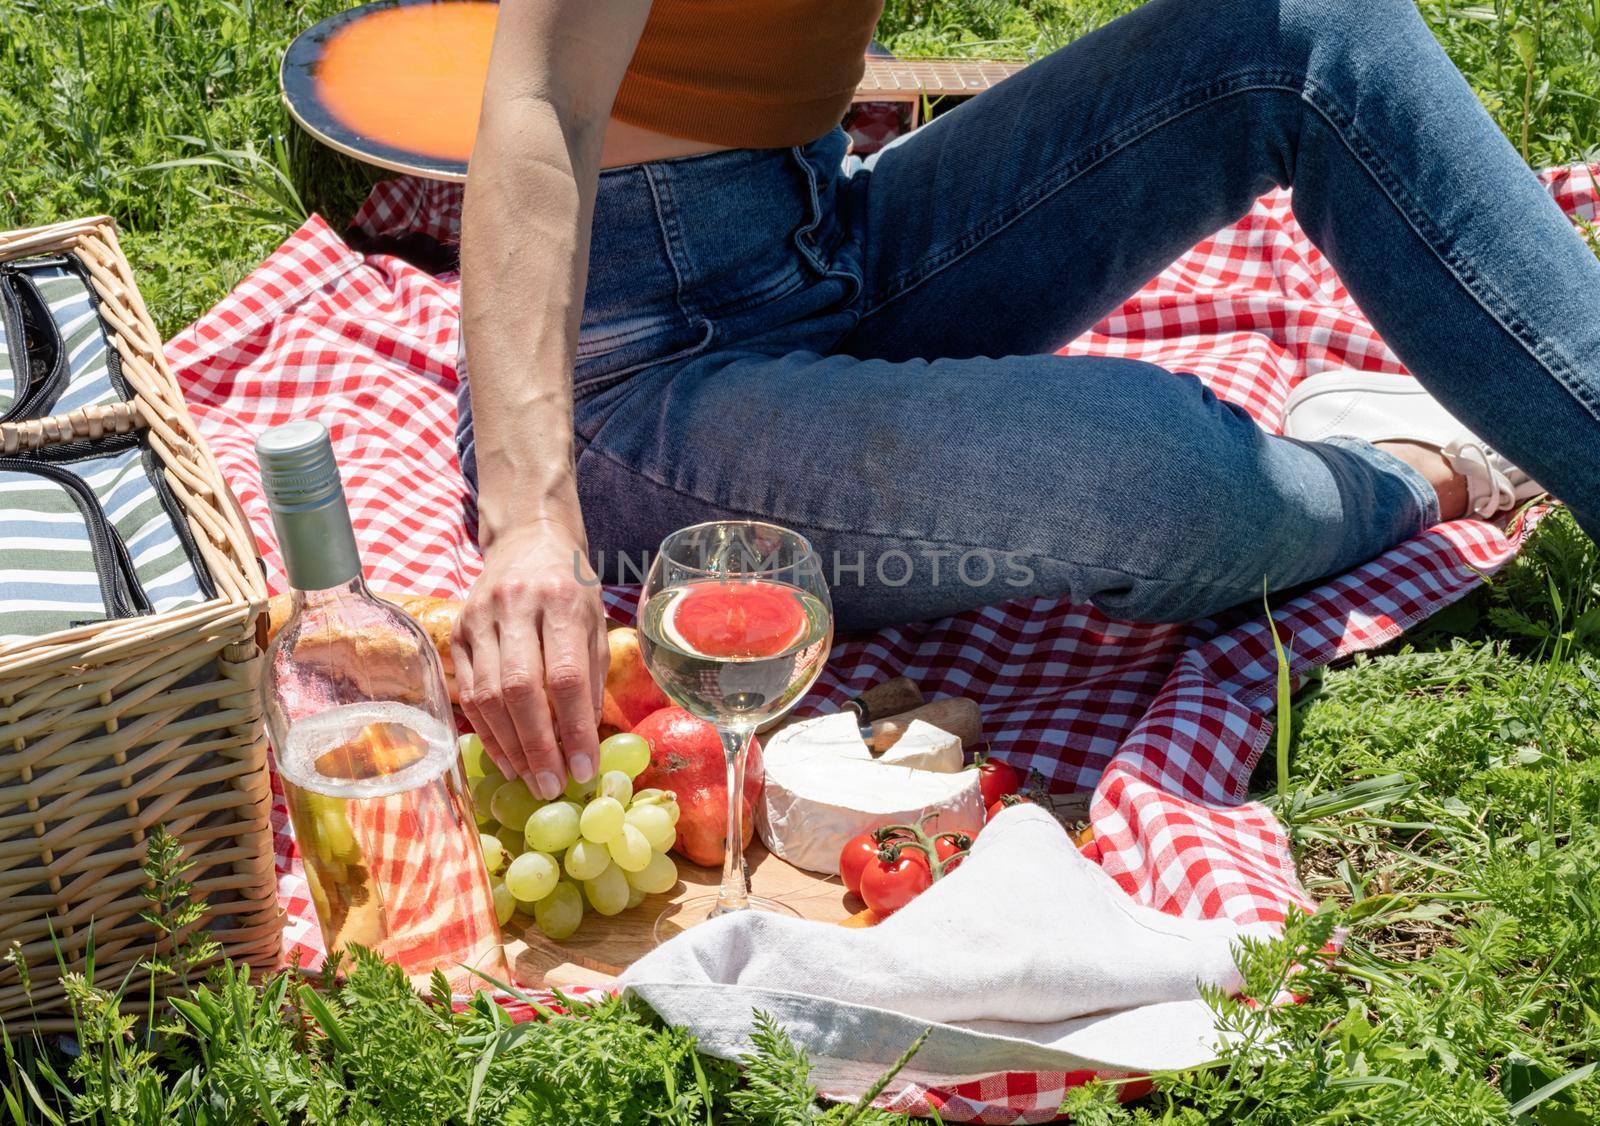 Young woman in park outside at sunny day, enjoying summertime dreaming and drinking wine. Millennial woman having picnic outdoors in sunny day